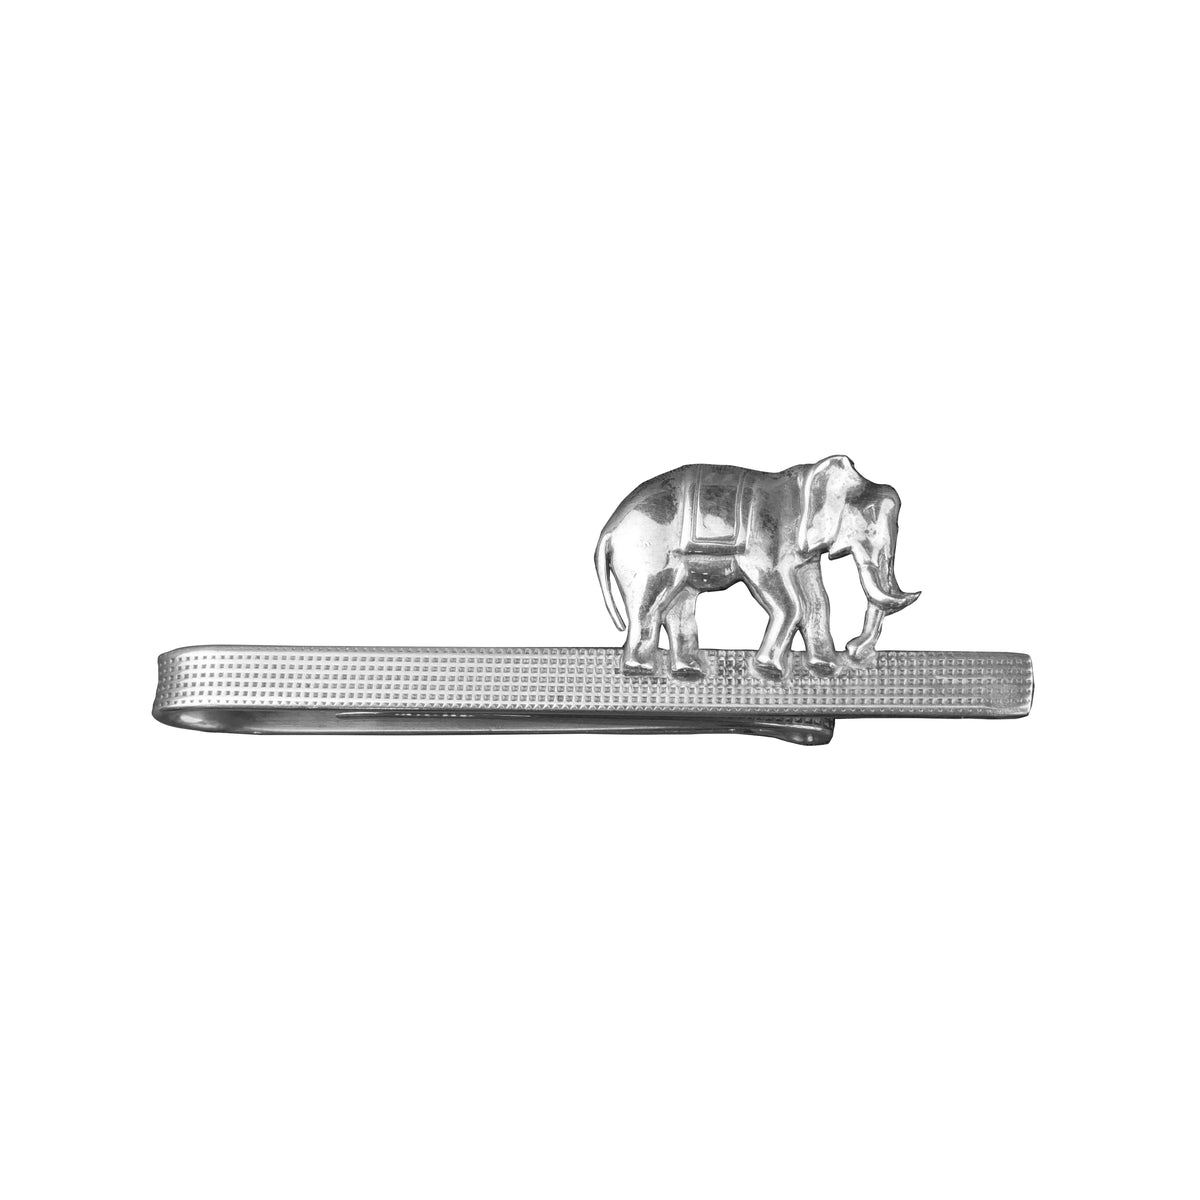 Hermès Money Clip, Rope Design, Silver-plated